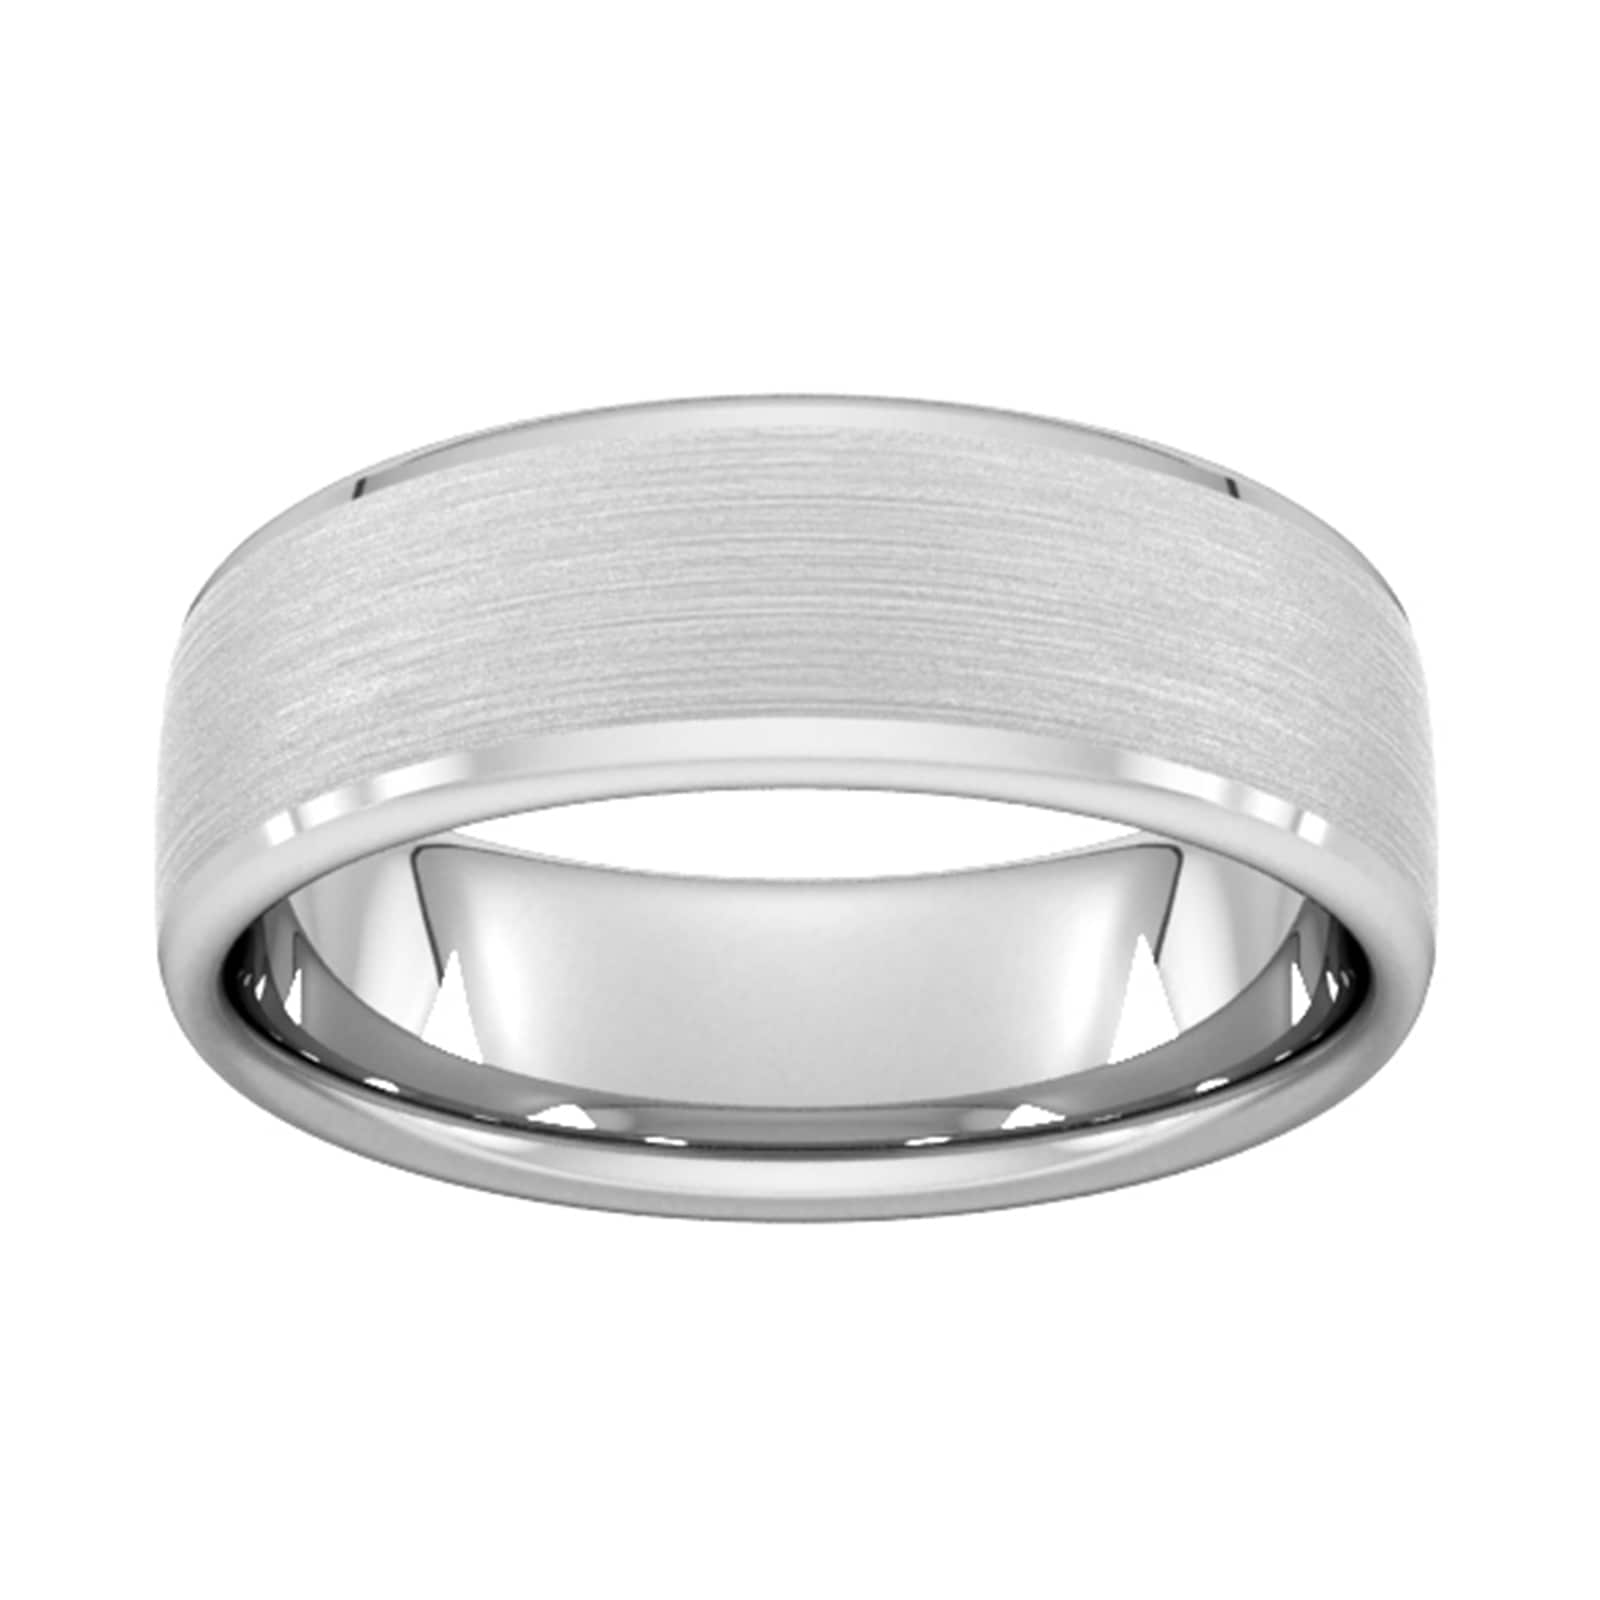 7mm D Shape Standard Polished Chamfered Edges With Matt Centre Wedding Ring In 9 Carat White Gold - Ring Size S